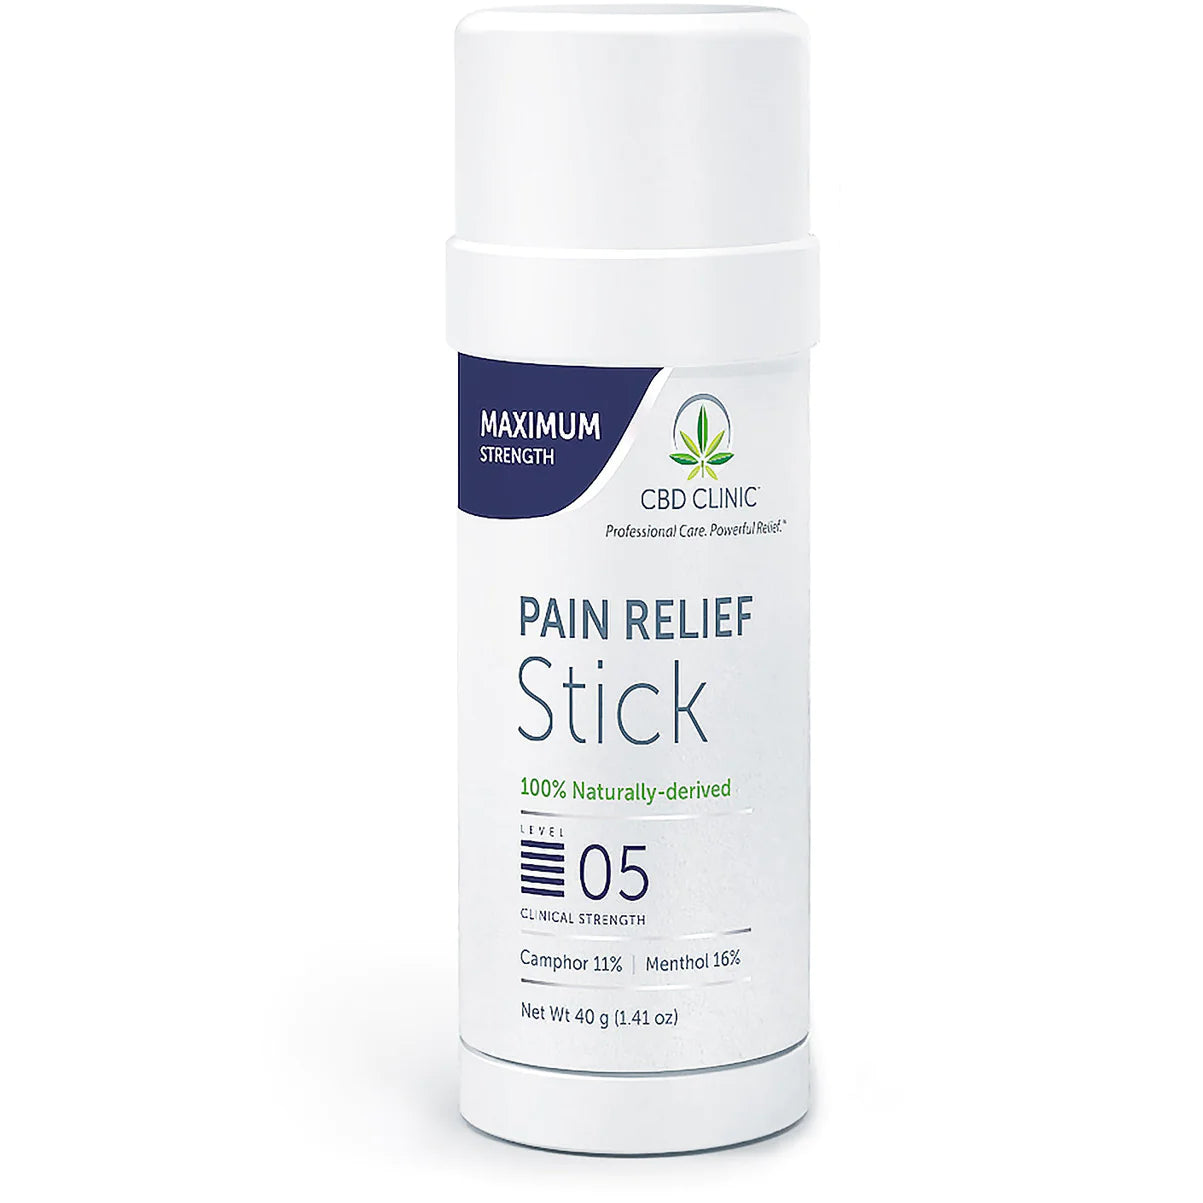 Pain Relief Stick